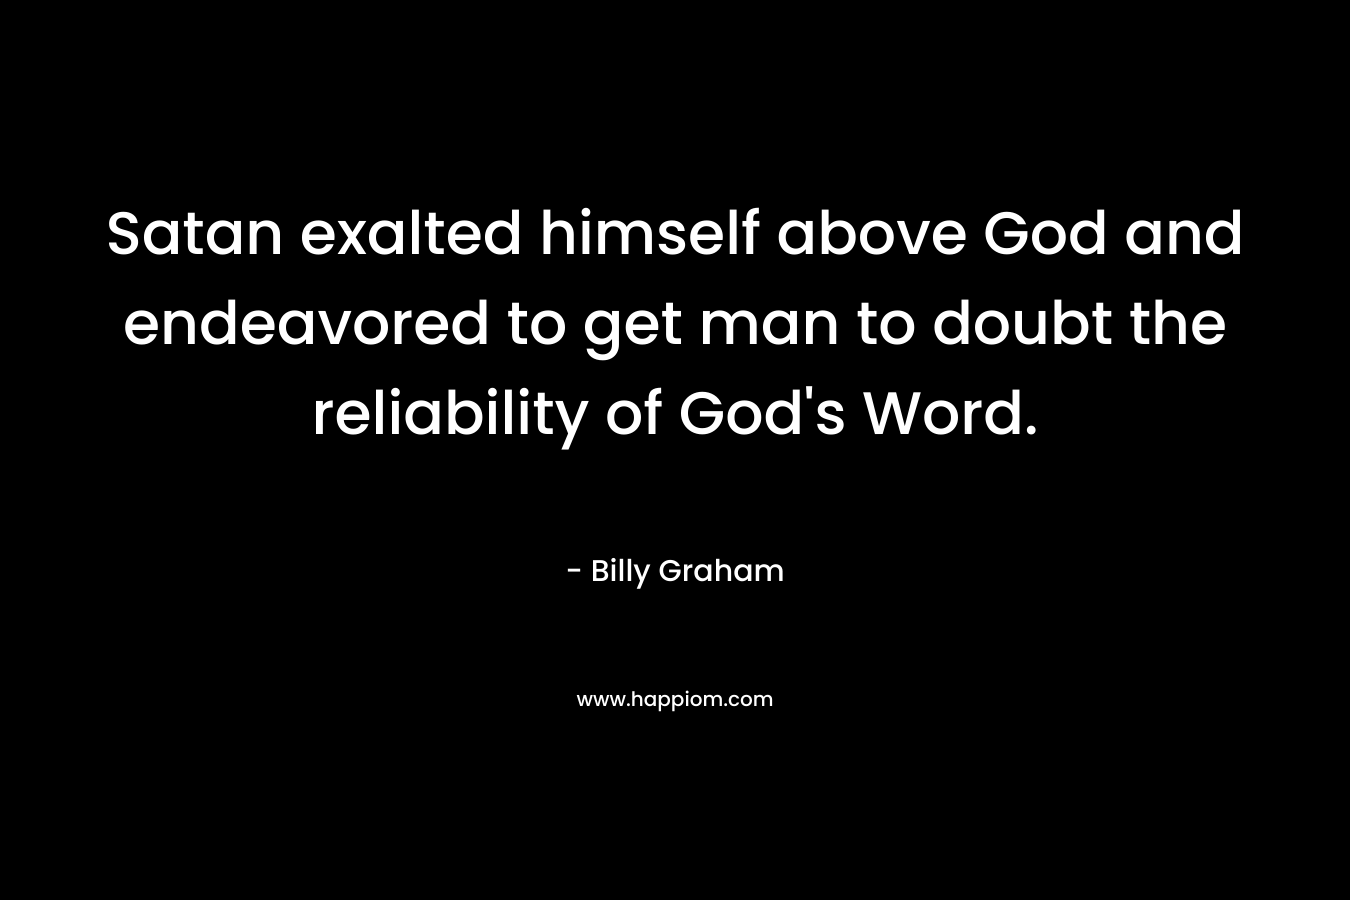 Satan exalted himself above God and endeavored to get man to doubt the reliability of God's Word.